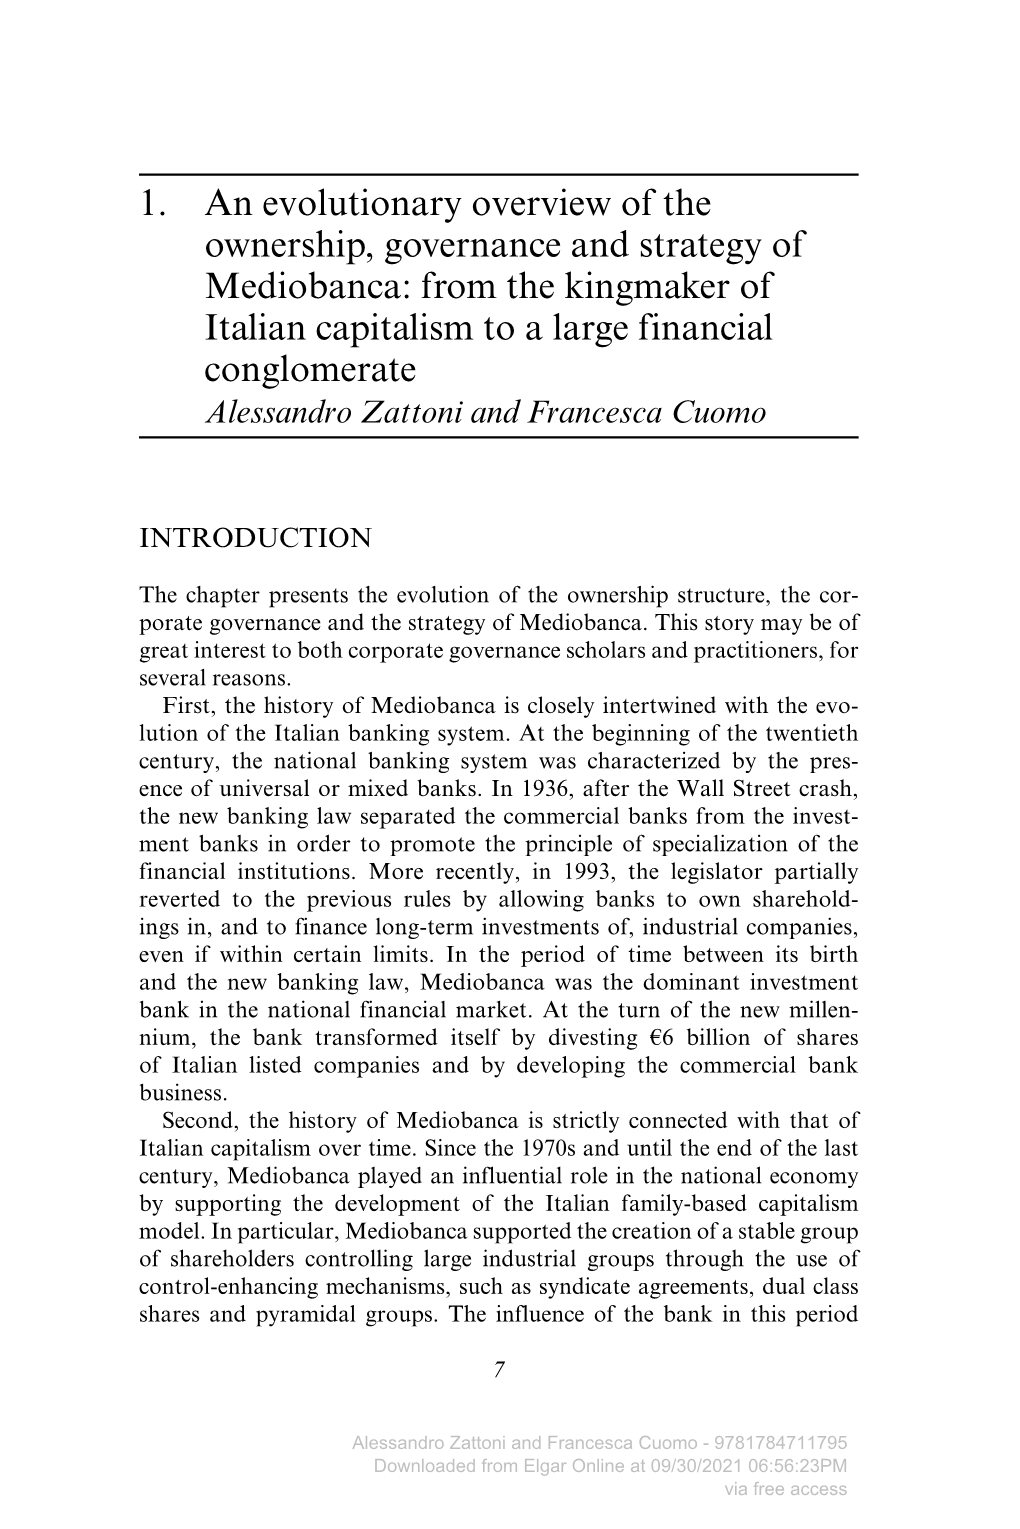 1. an Evolutionary Overview of the Ownership, Governance and Strategy of Mediobanca